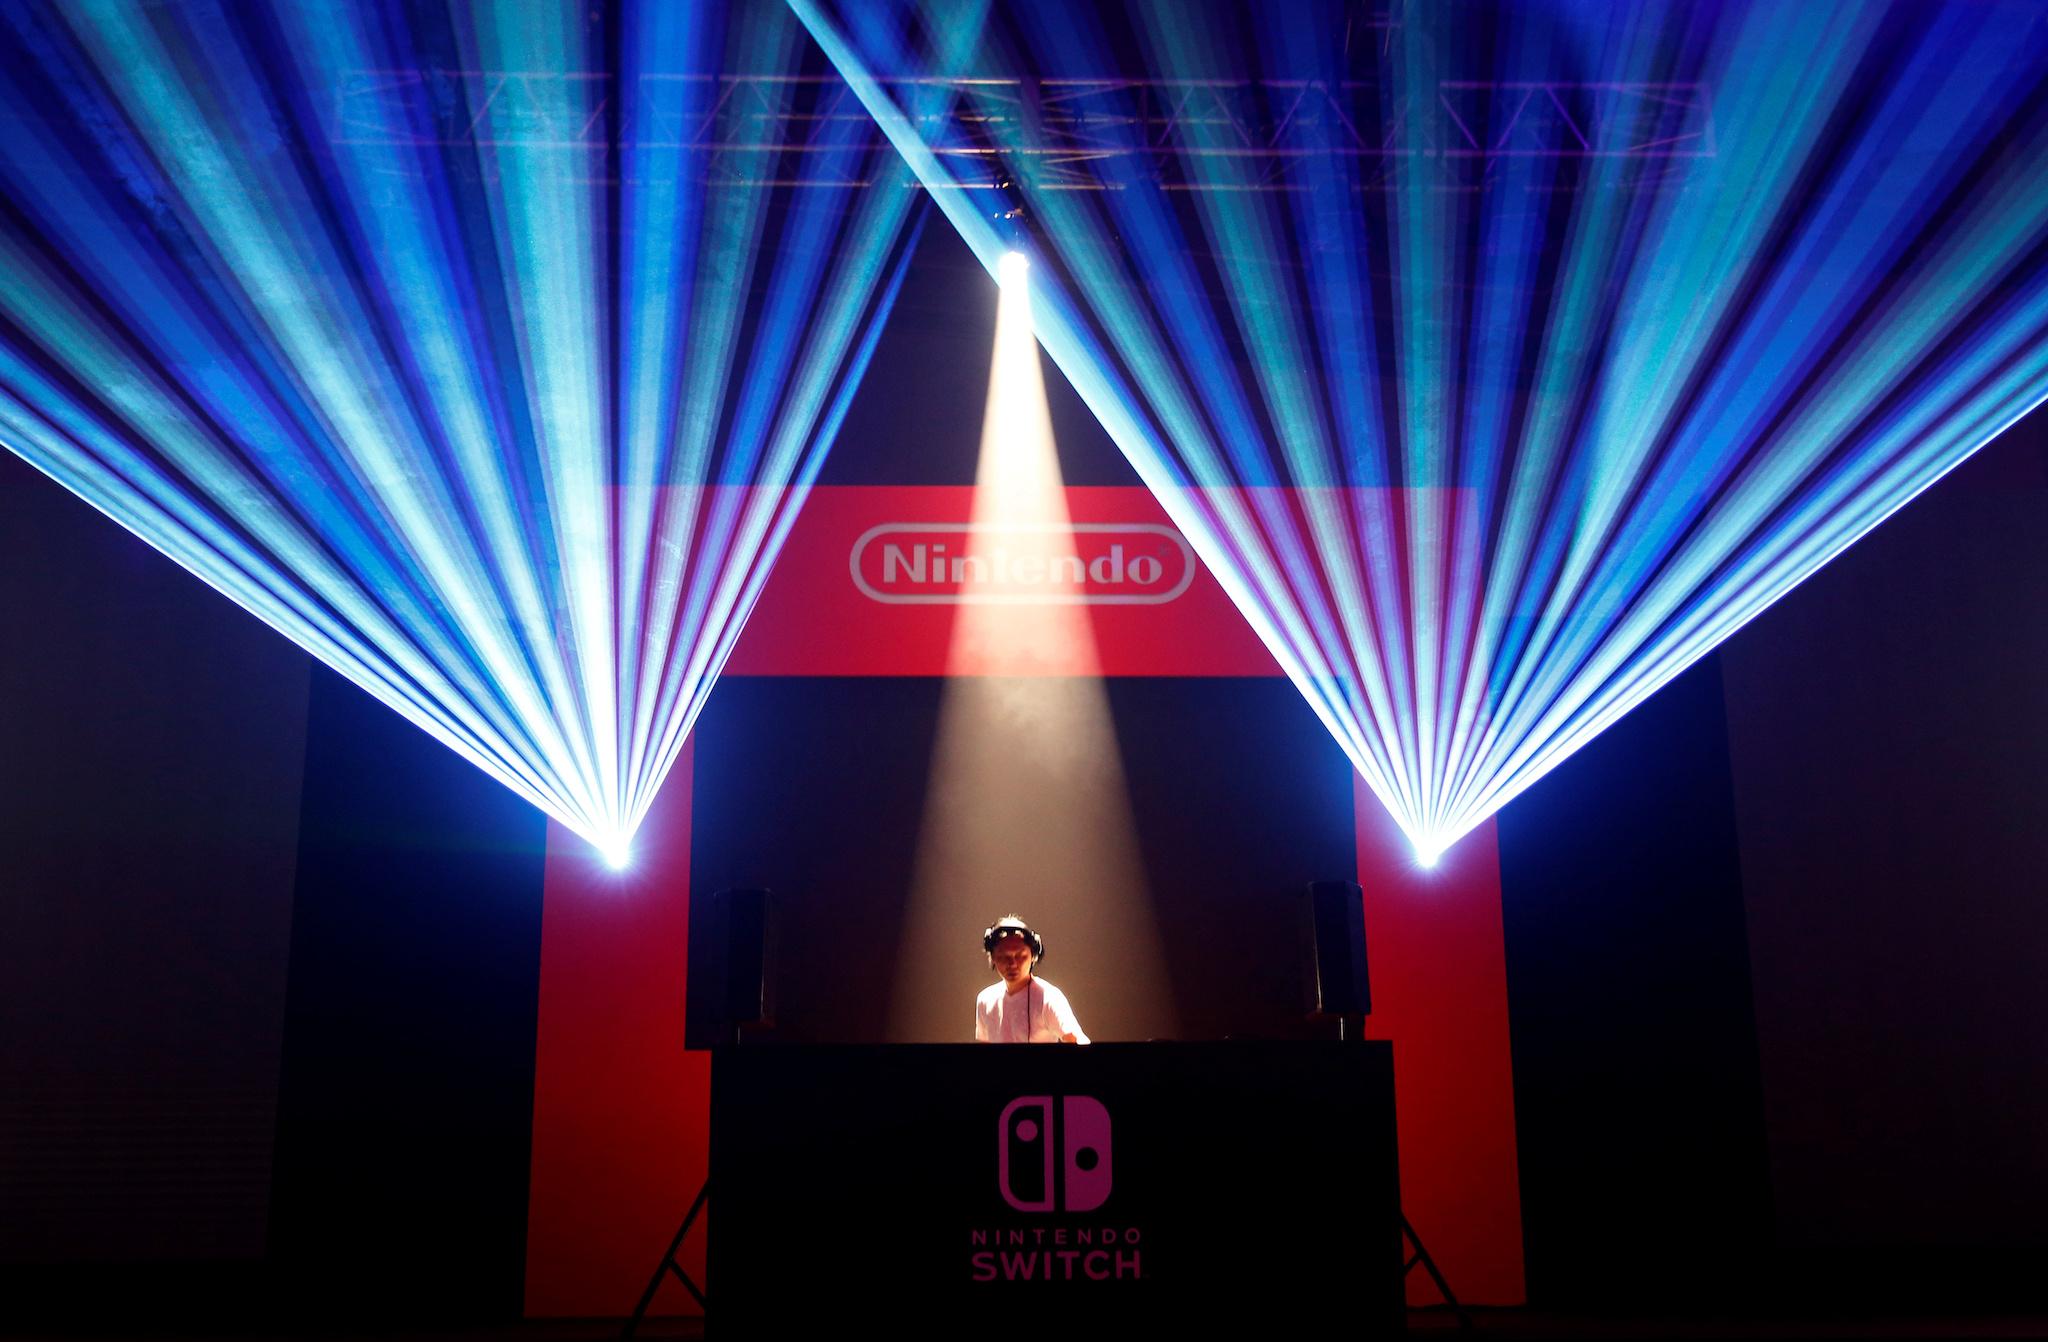 A DJ performs in front of Nintendo's logo at the presentation ceremony of its new game console Switch in Tokyo, Japan January 13, 2017